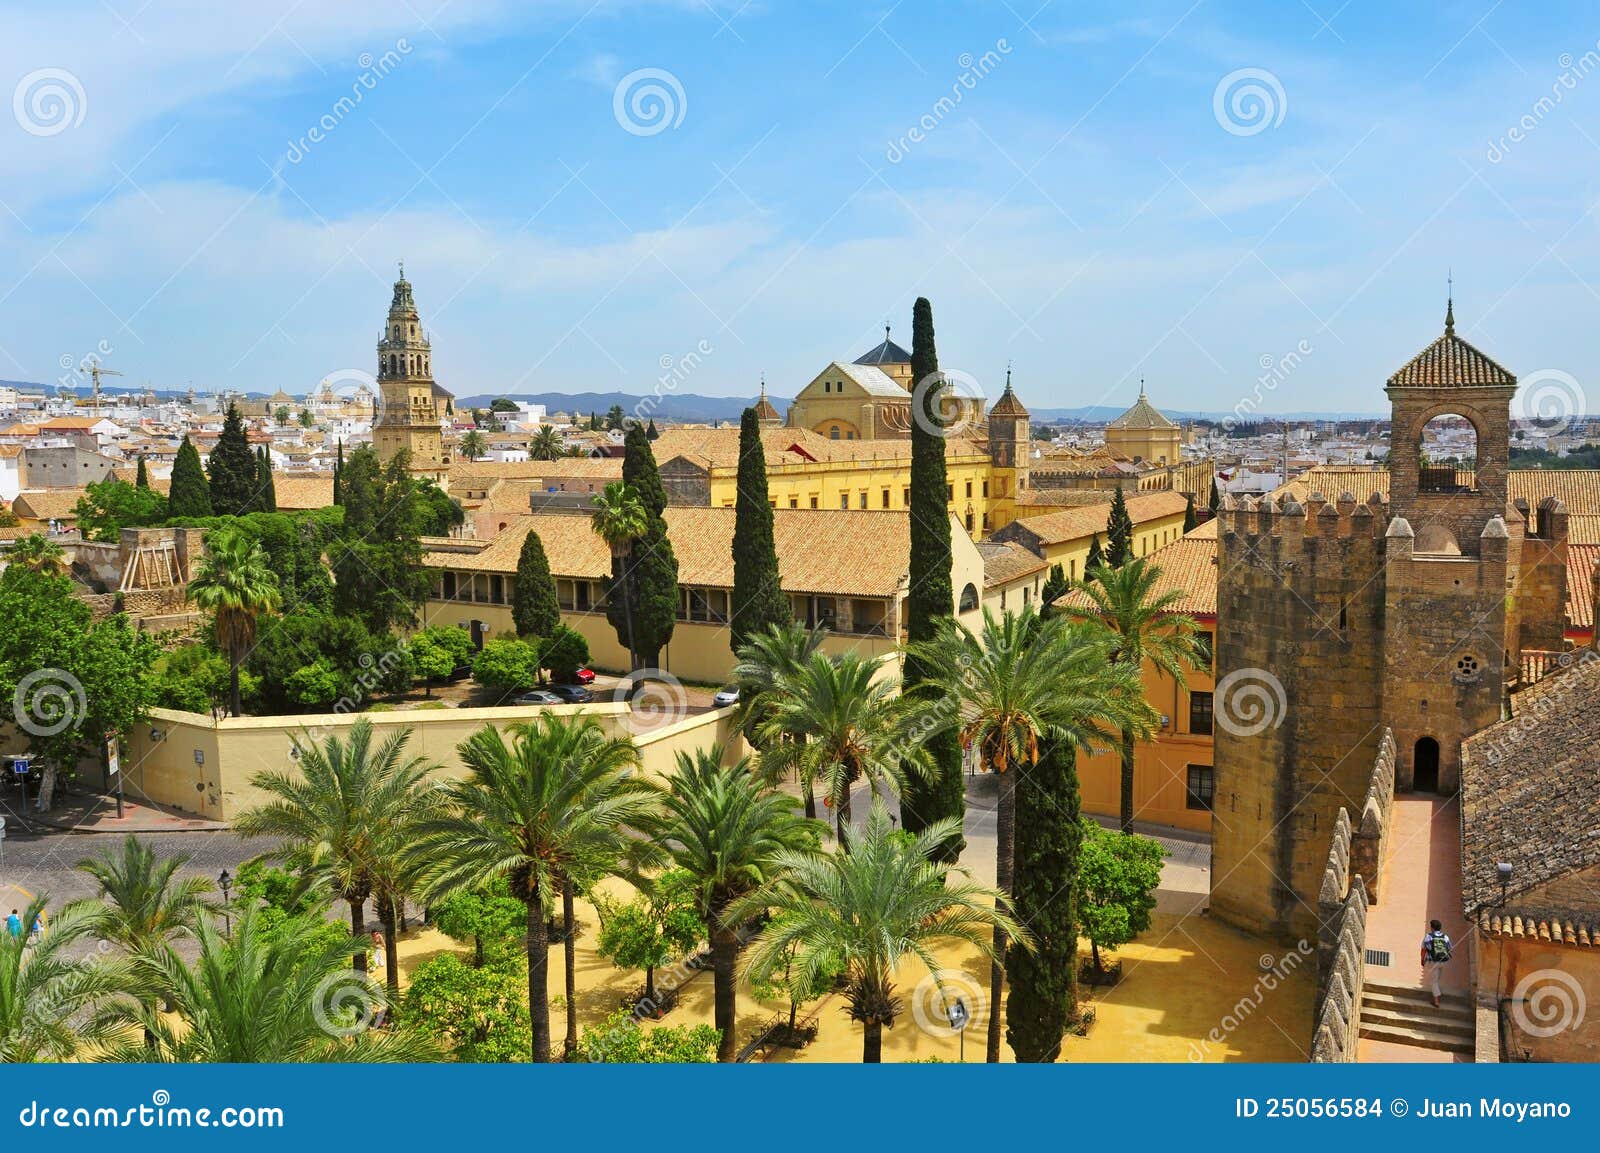 alcazar and cathedral mosque of cordoba, spain